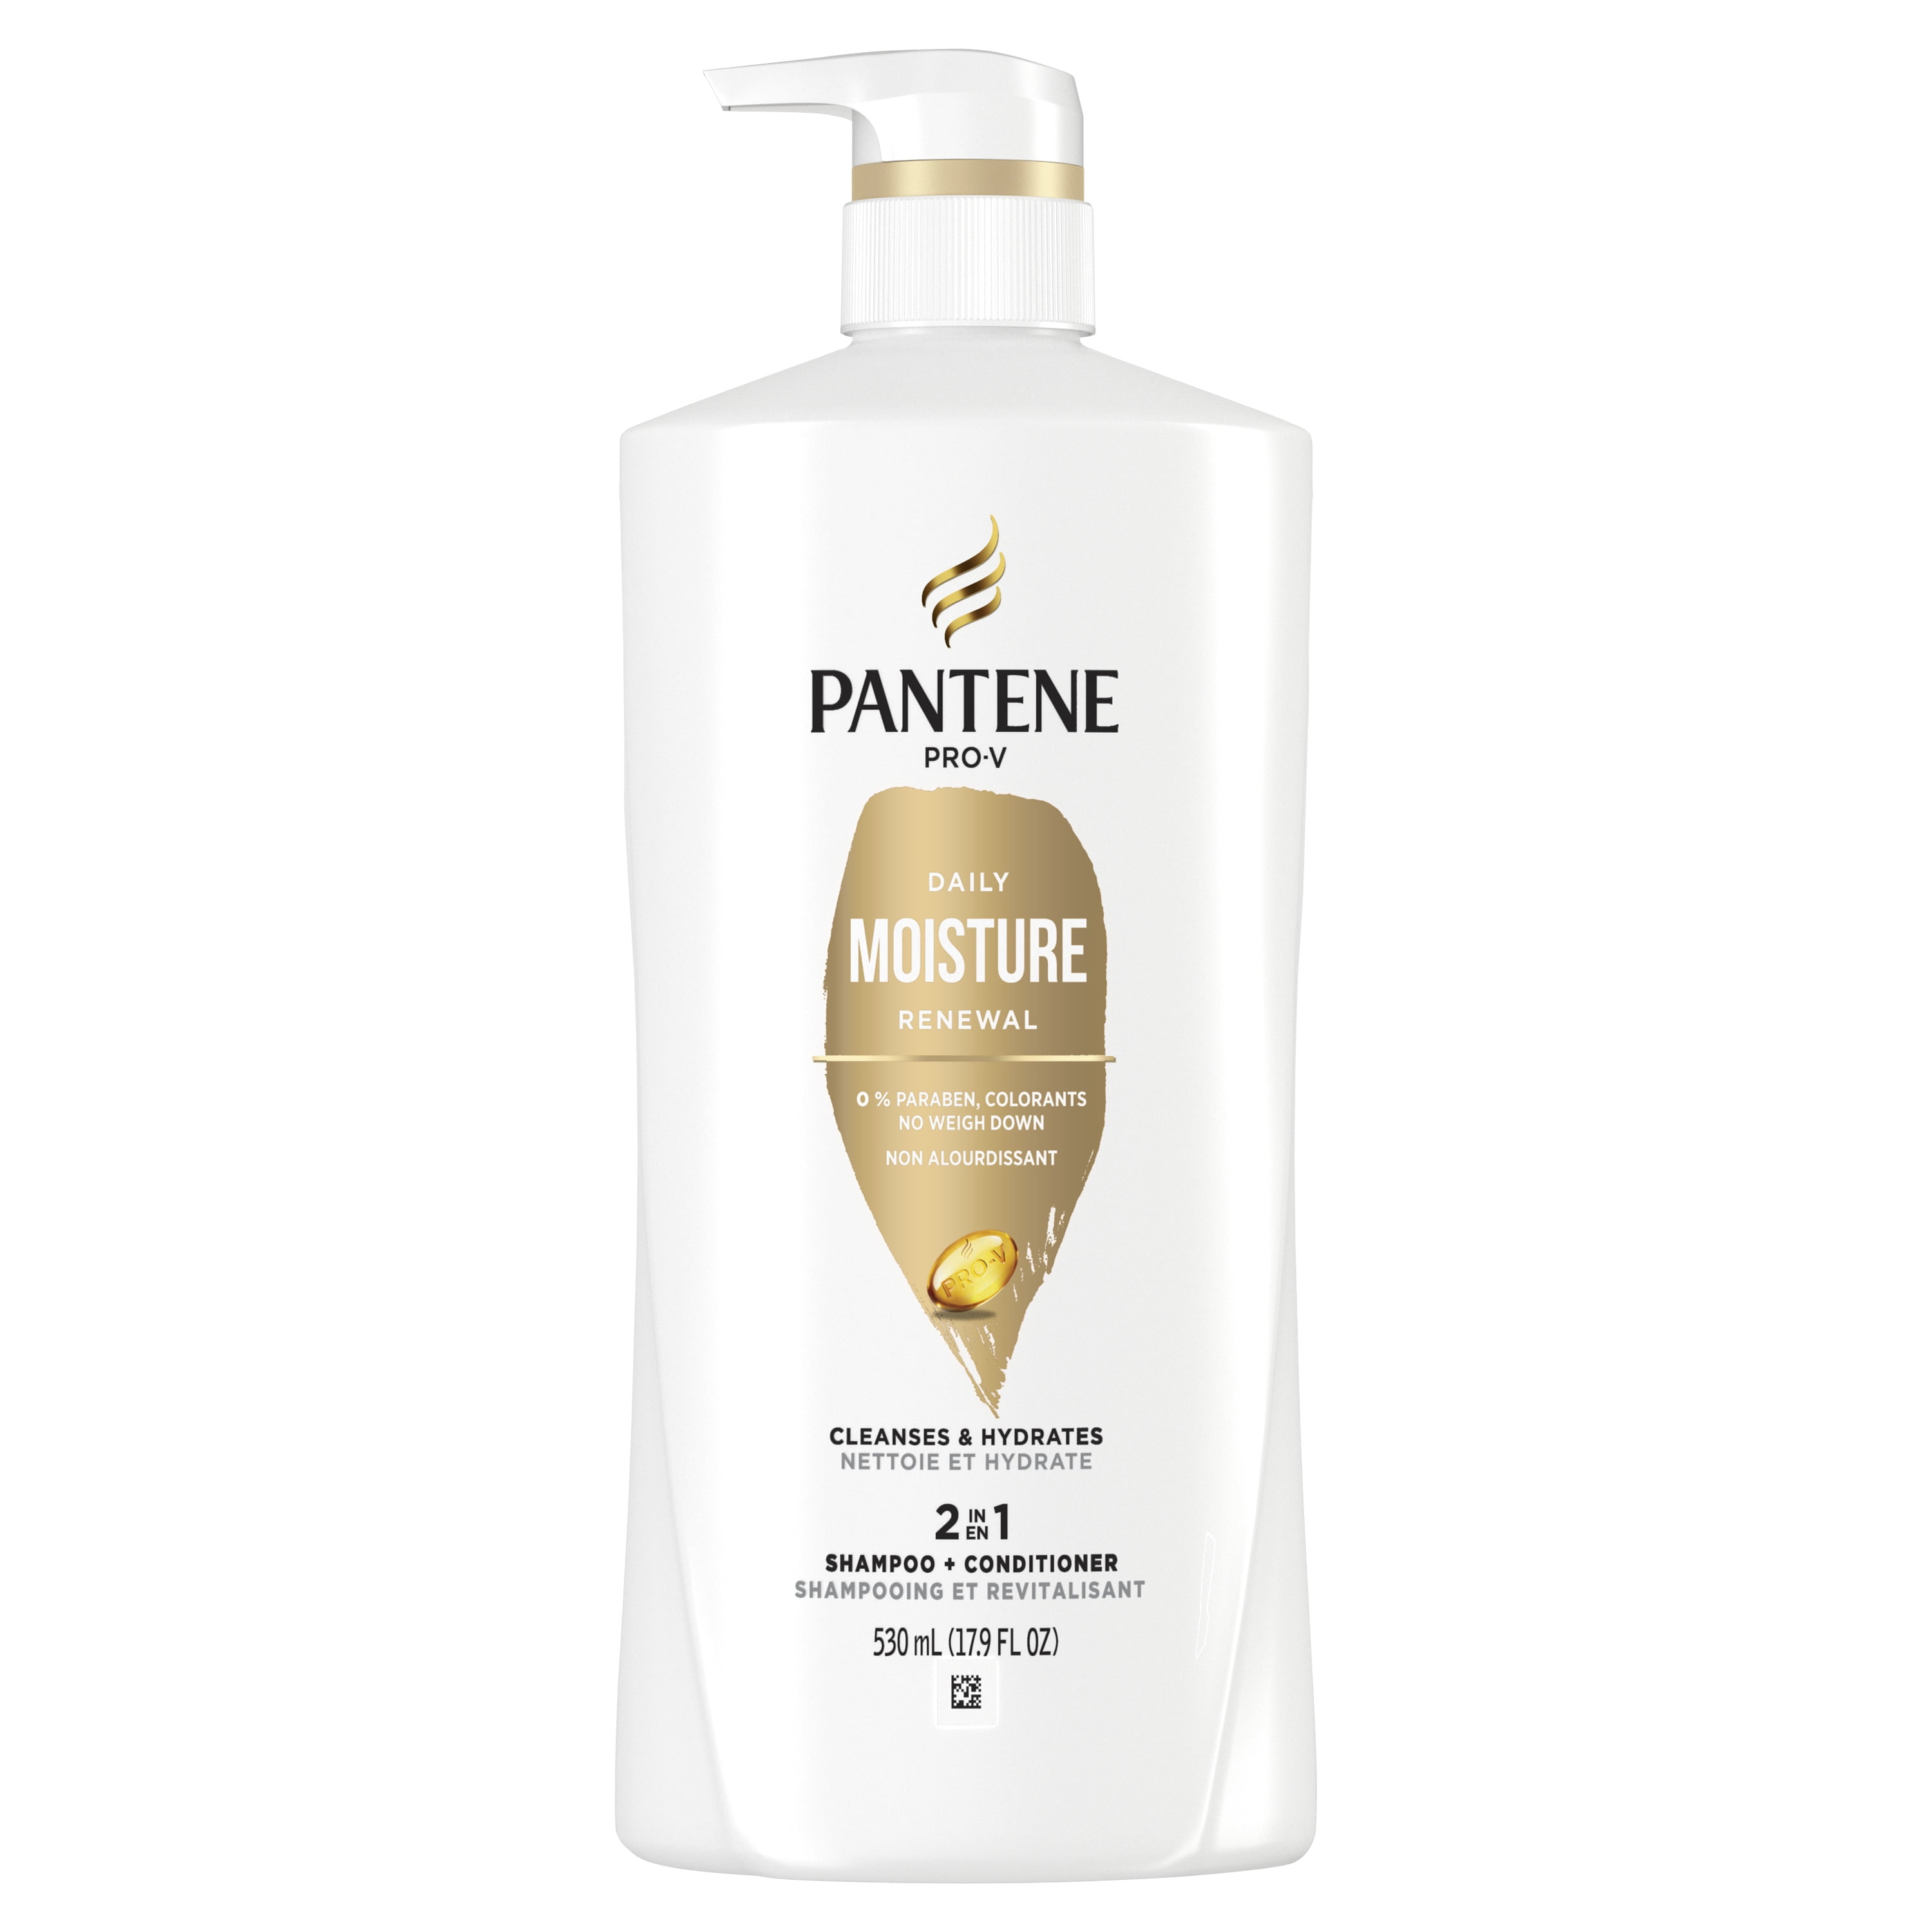 Pantene Pro-V Daily Moisture Renewal 2 in 1 + Conditioner, for All 17.9 fl oz -